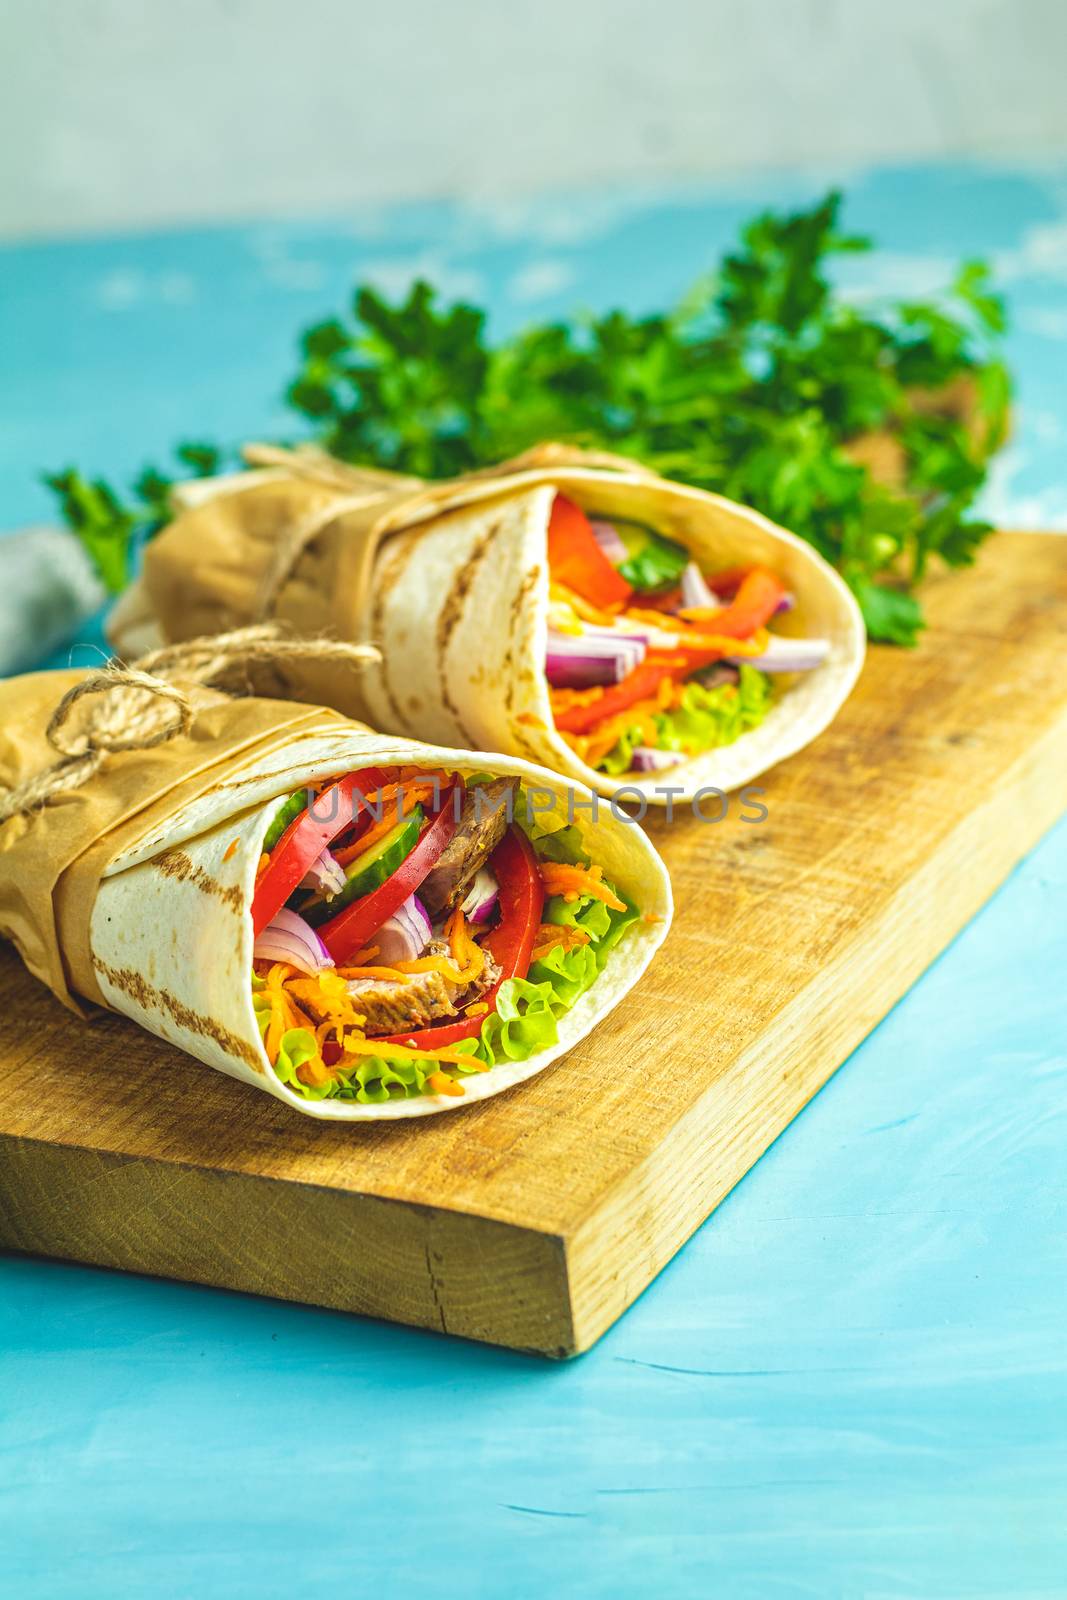 Shawarma sandwich gyro fresh roll of lavash (pita bread) chicken beef shawarma falafel RecipeTin Eats Filled with grilled meat, vegetables, cheese. Traditional Middle Eastern snack.